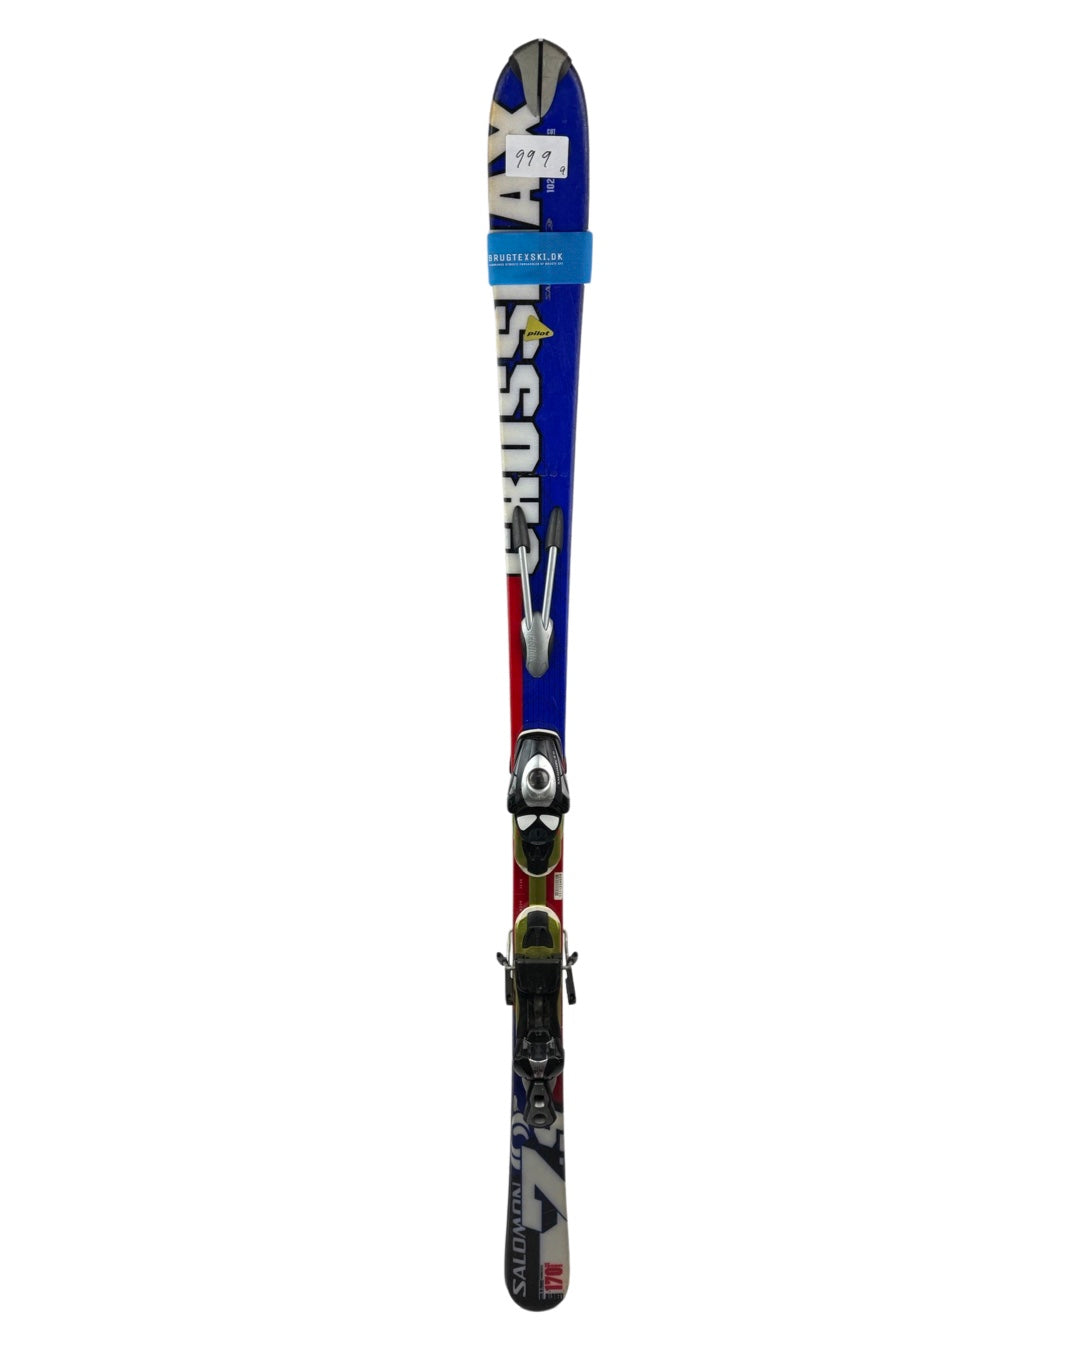 Adult skis - mixed 999